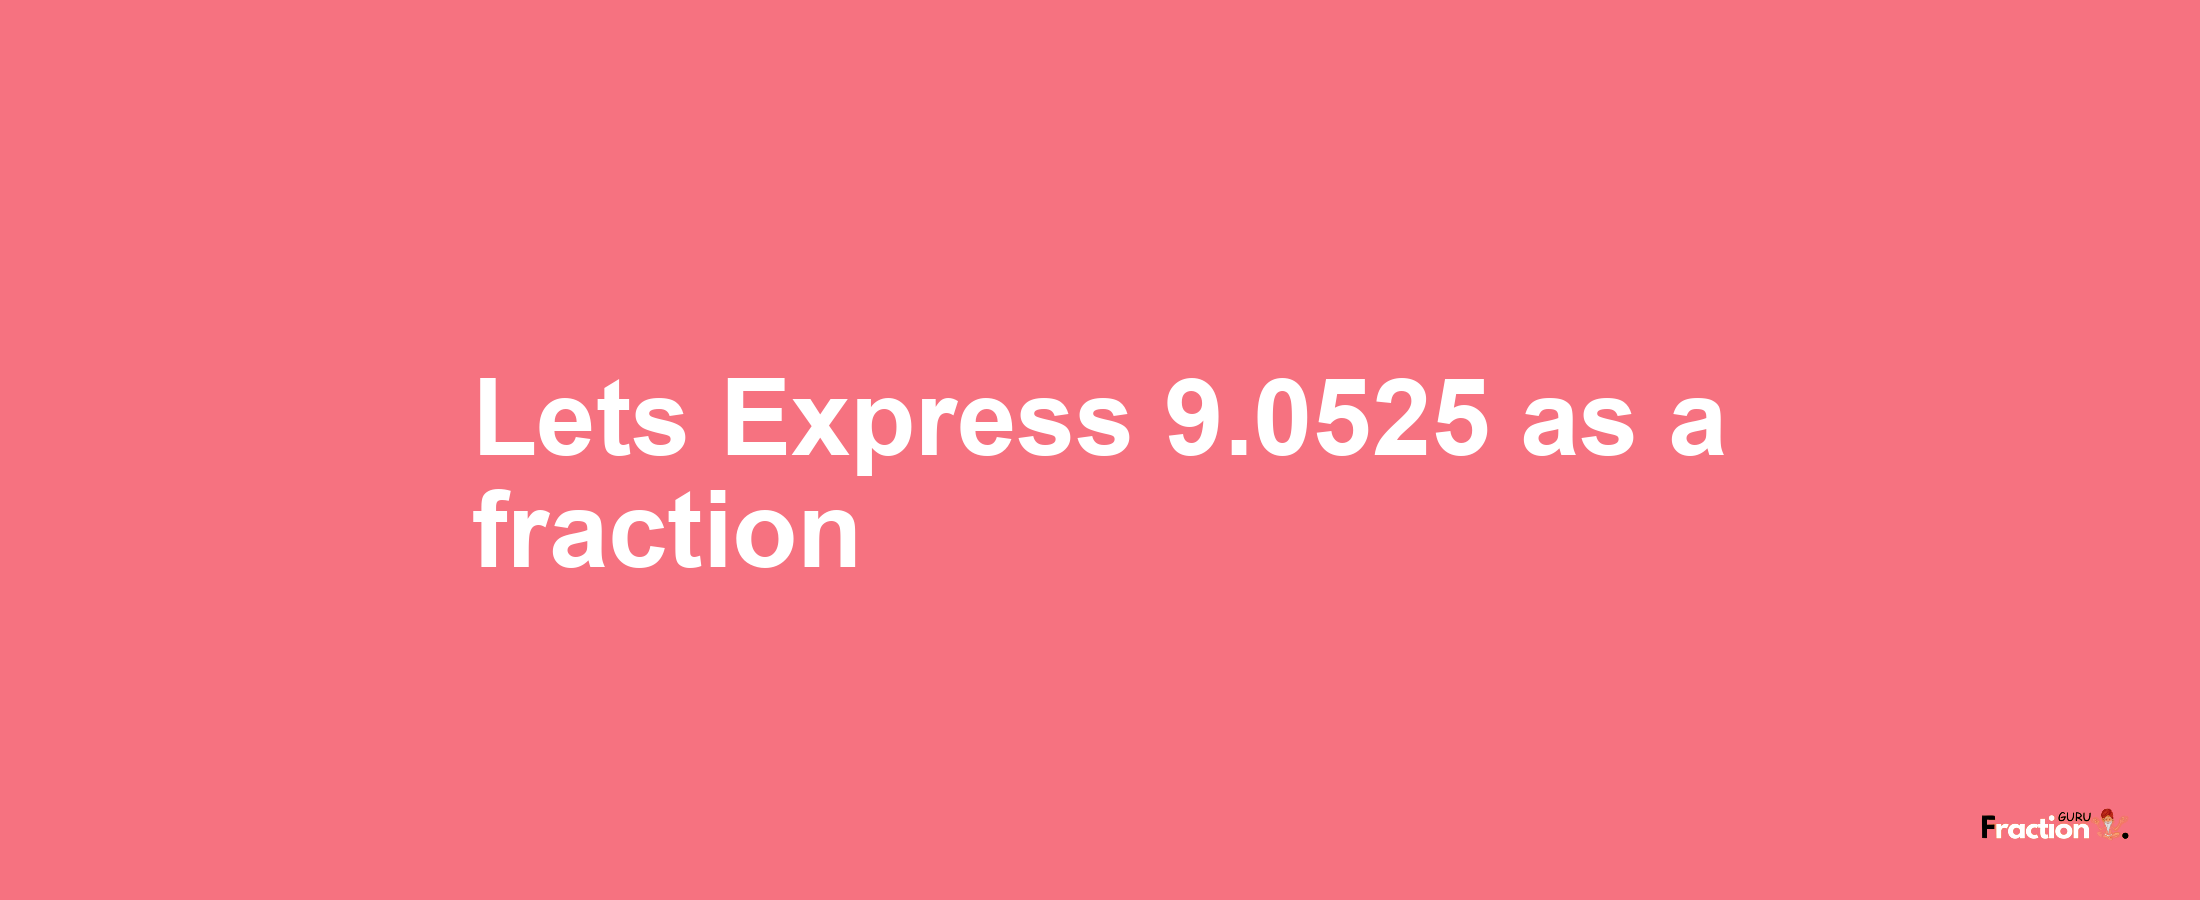 Lets Express 9.0525 as afraction